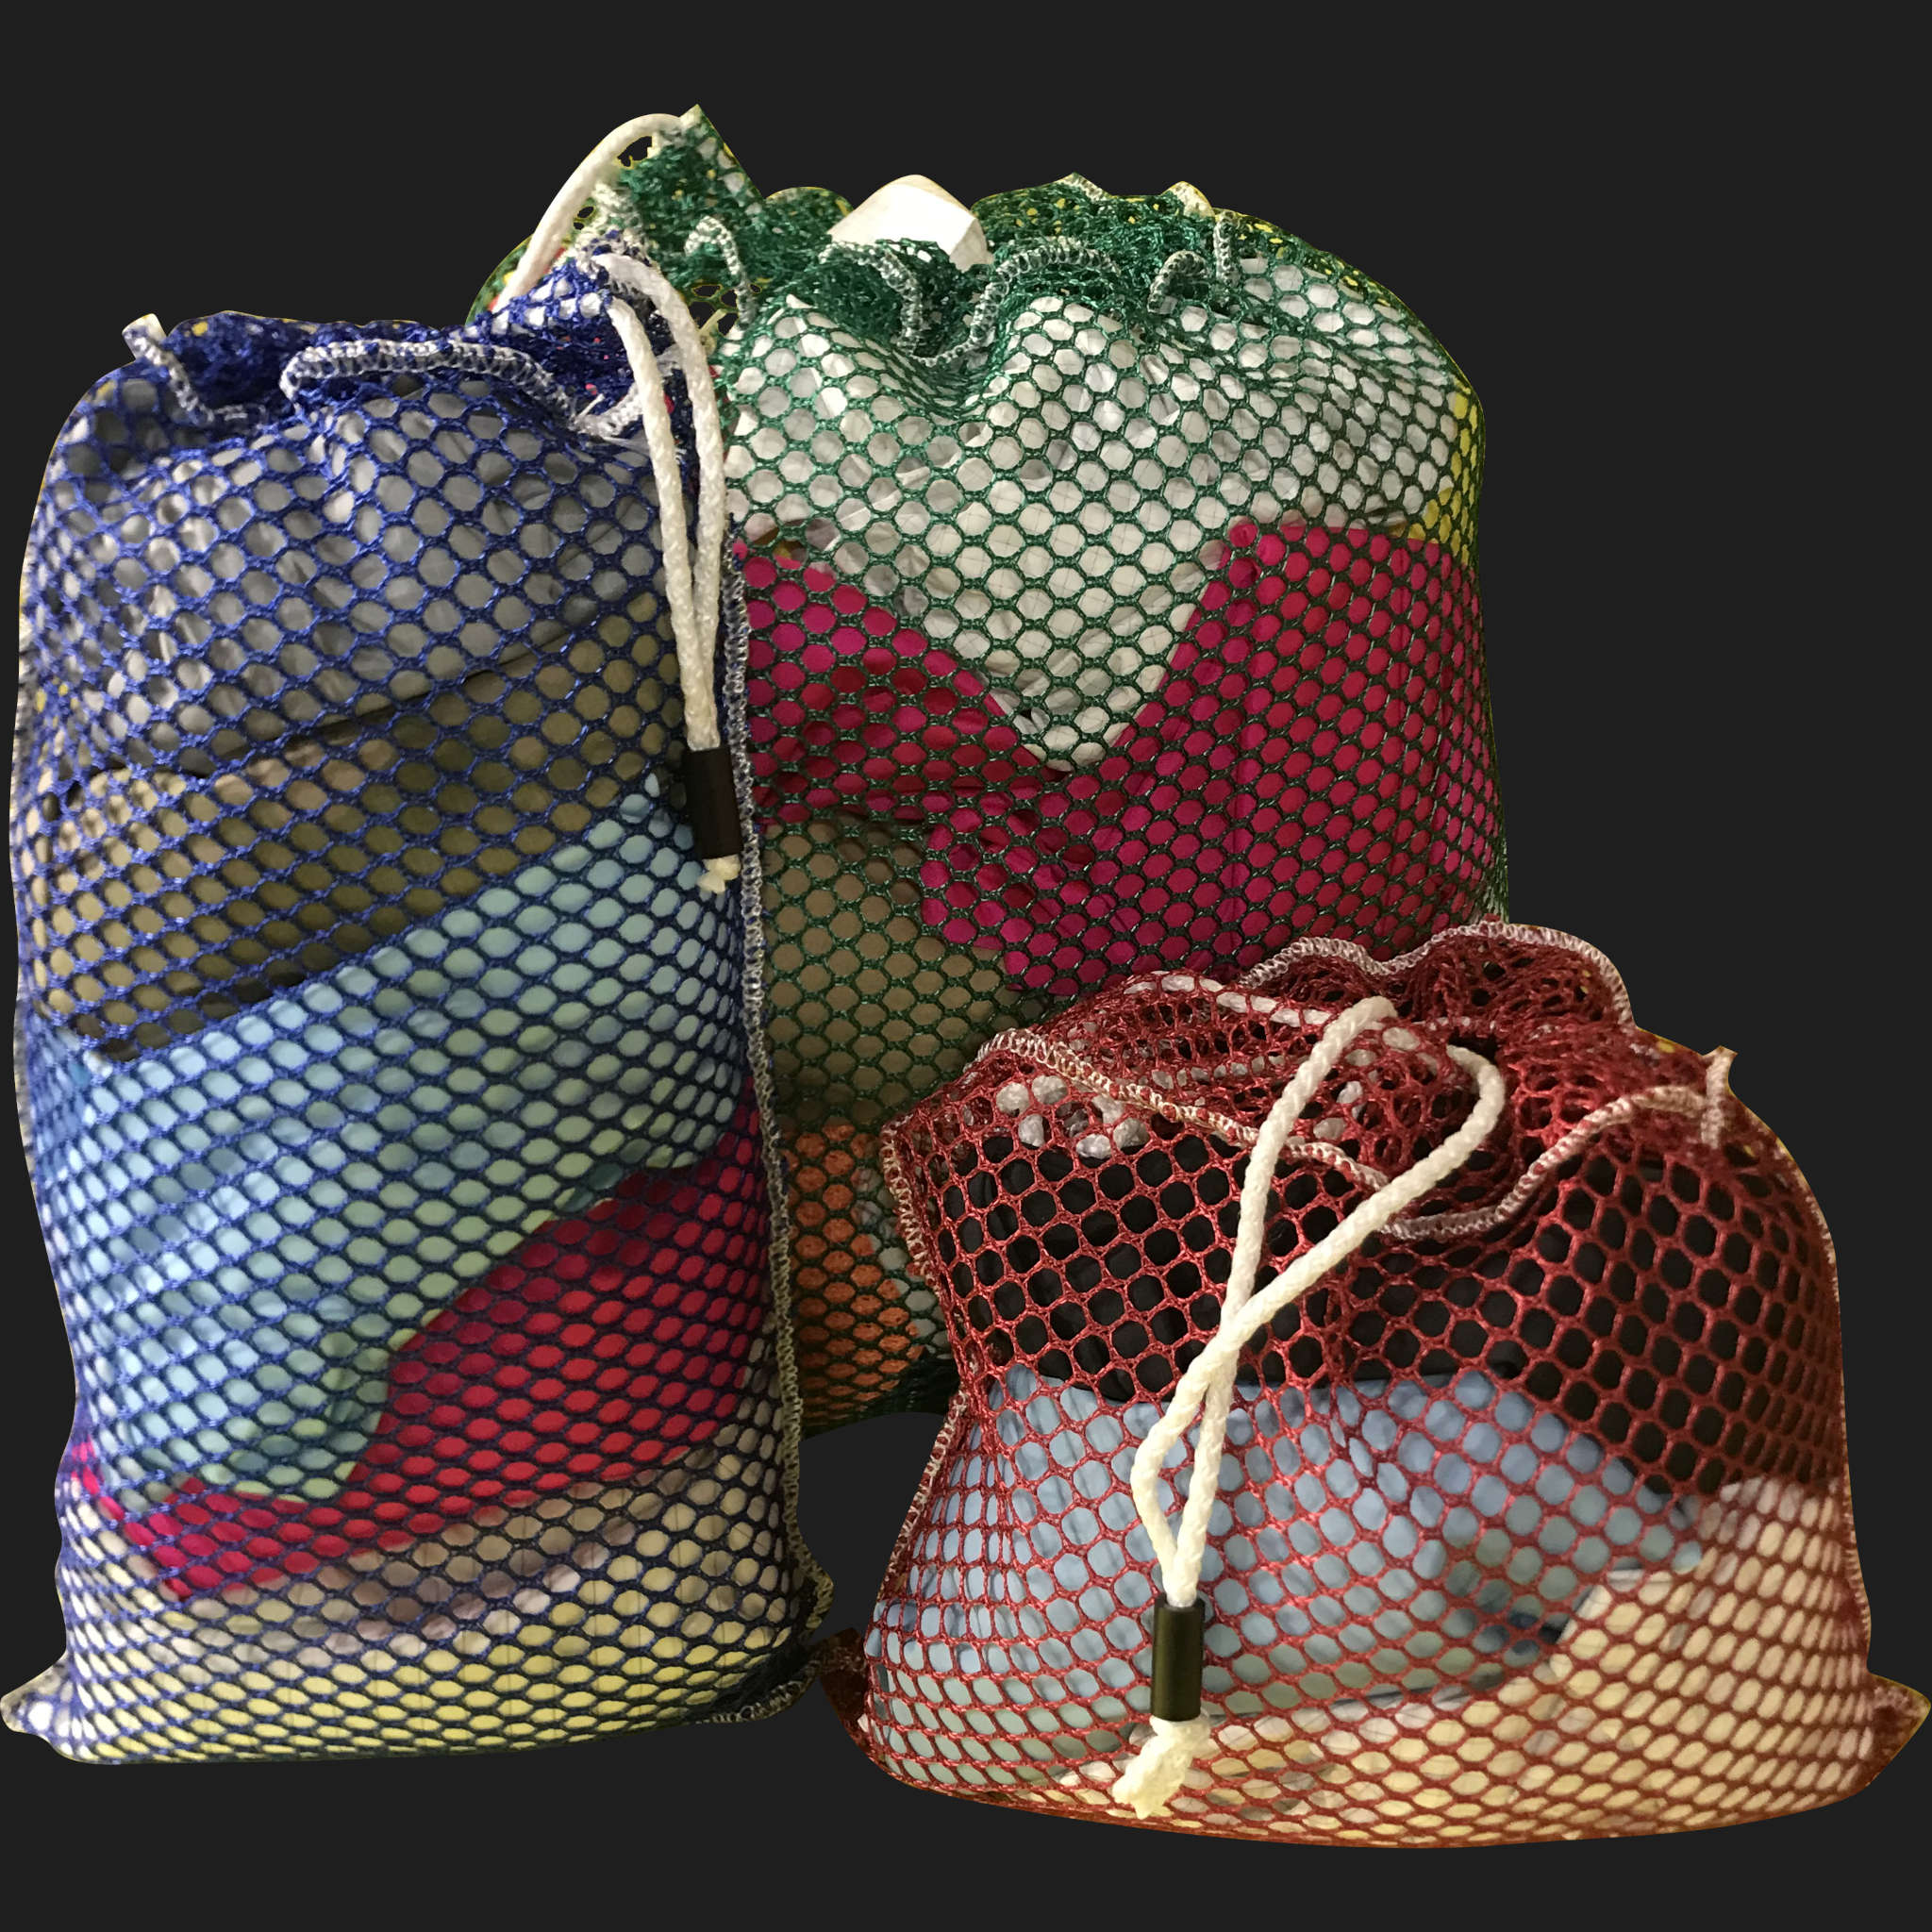 54" x 72" Customized Mesh-Net-Laundry Bags Heavy Duty with Cord and barrellock closure